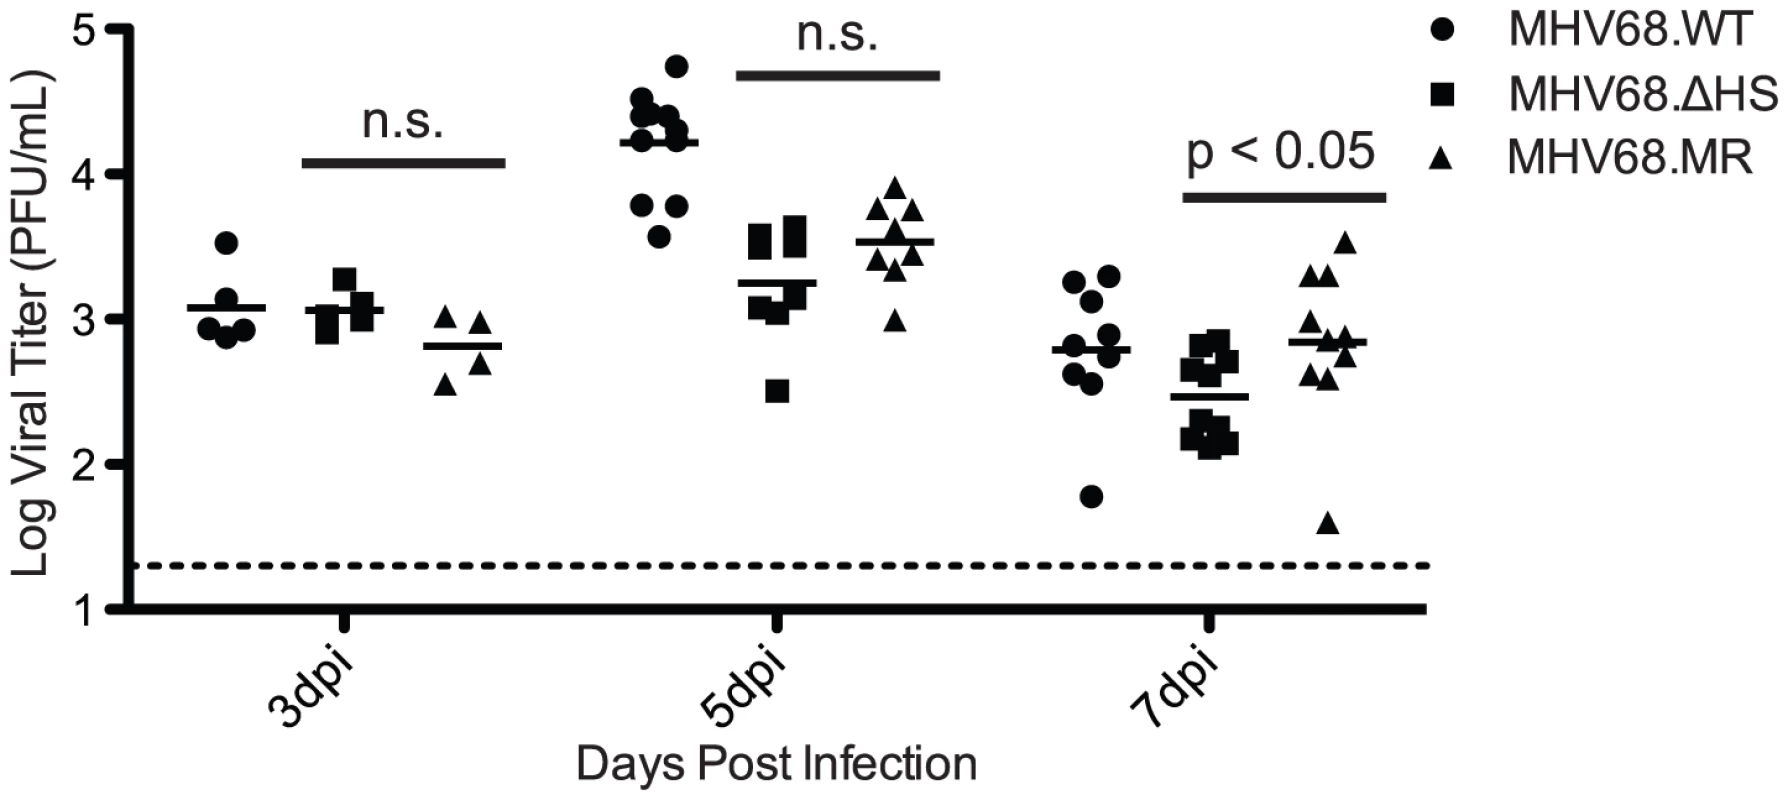 MHV68.ΔHS replicates to near MHV68.MR levels during the acute phase of infection in the mouse lung.